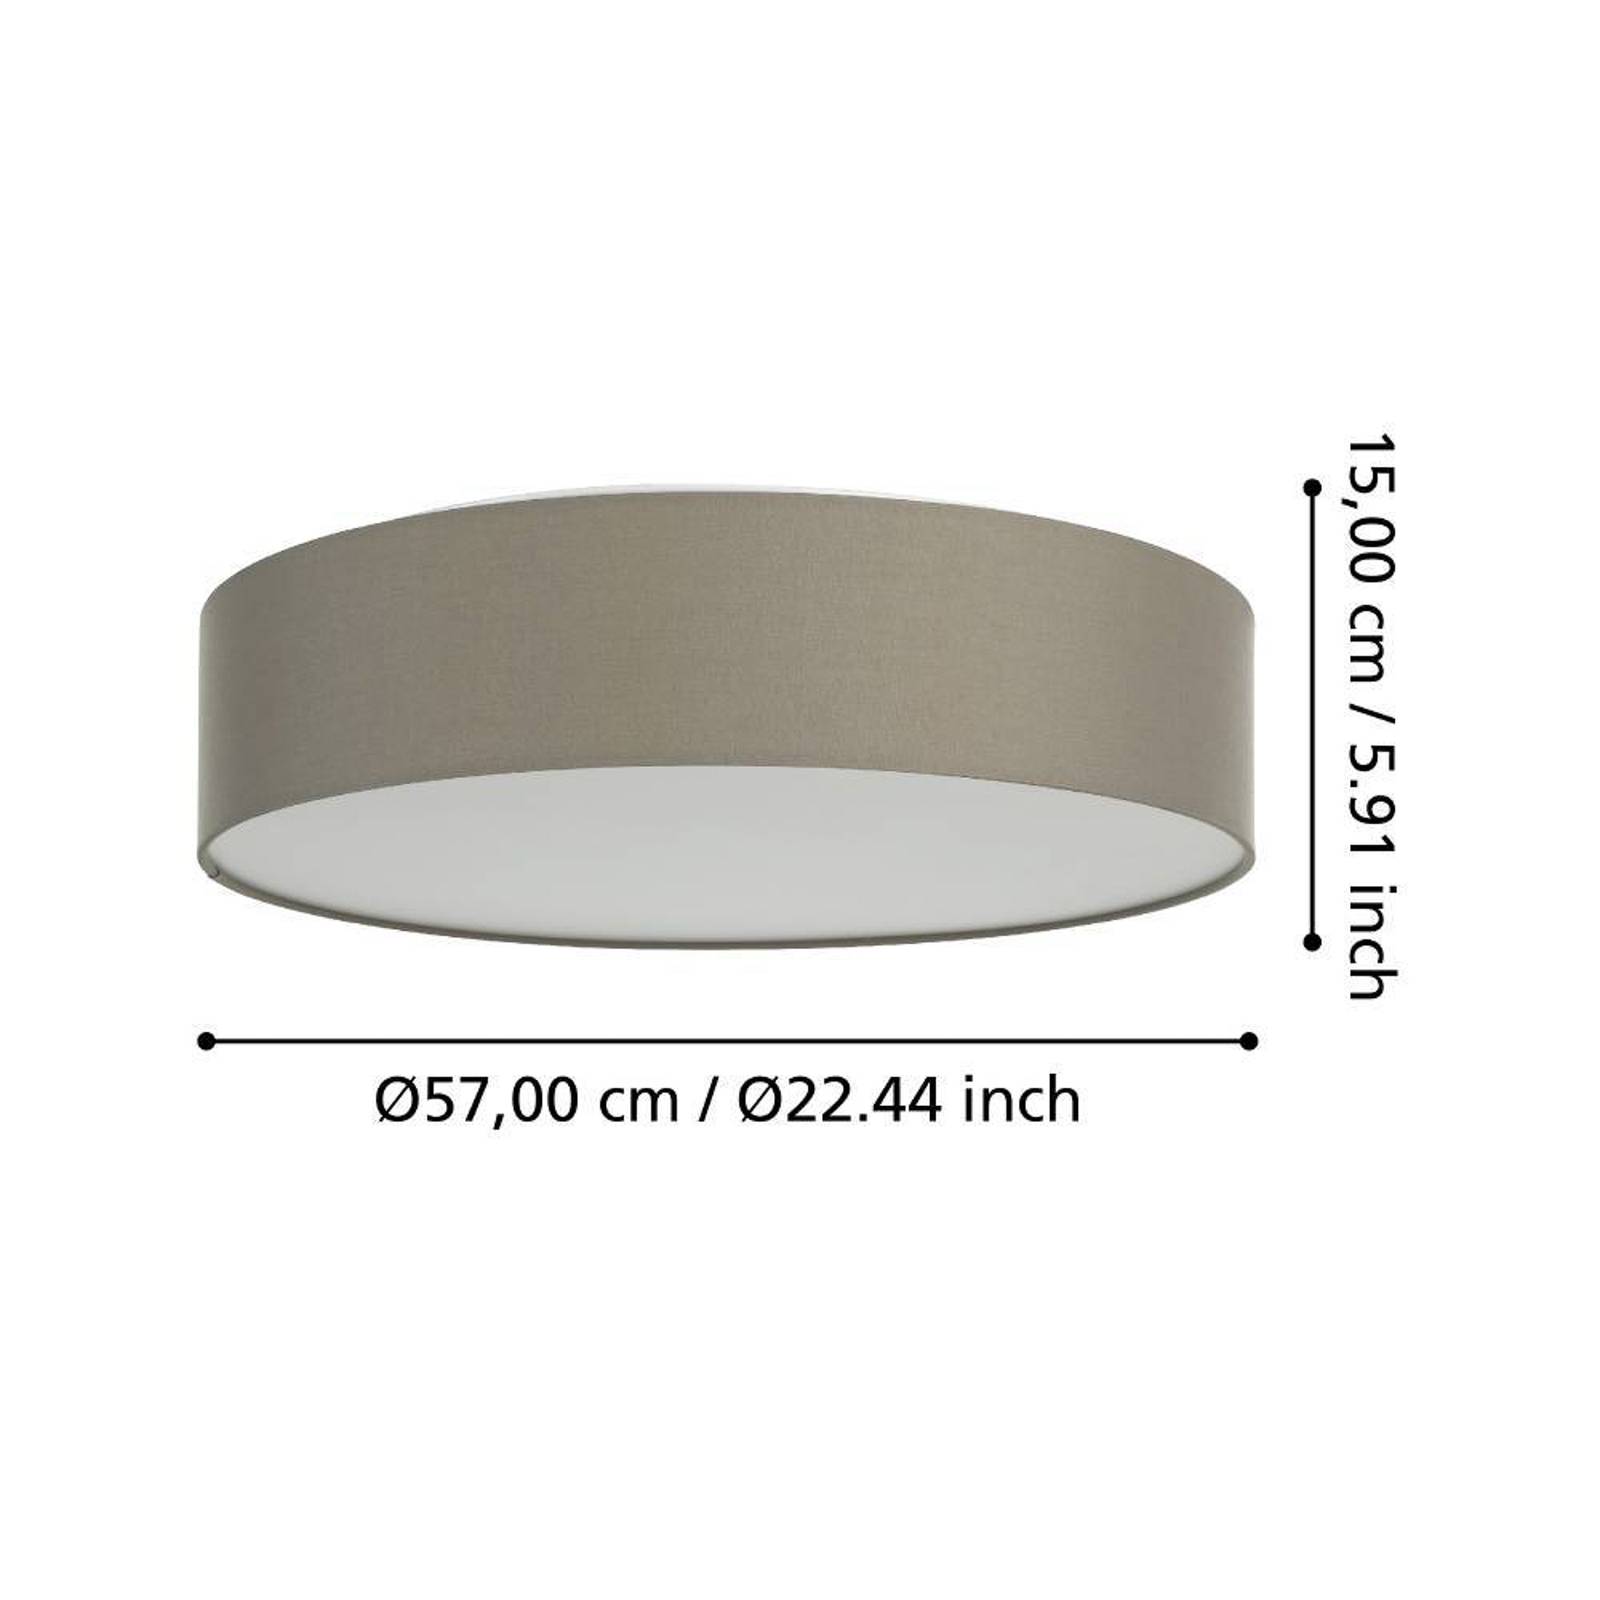 EGLO connect Romao-Z LED-taklampa Ø57cm taupe